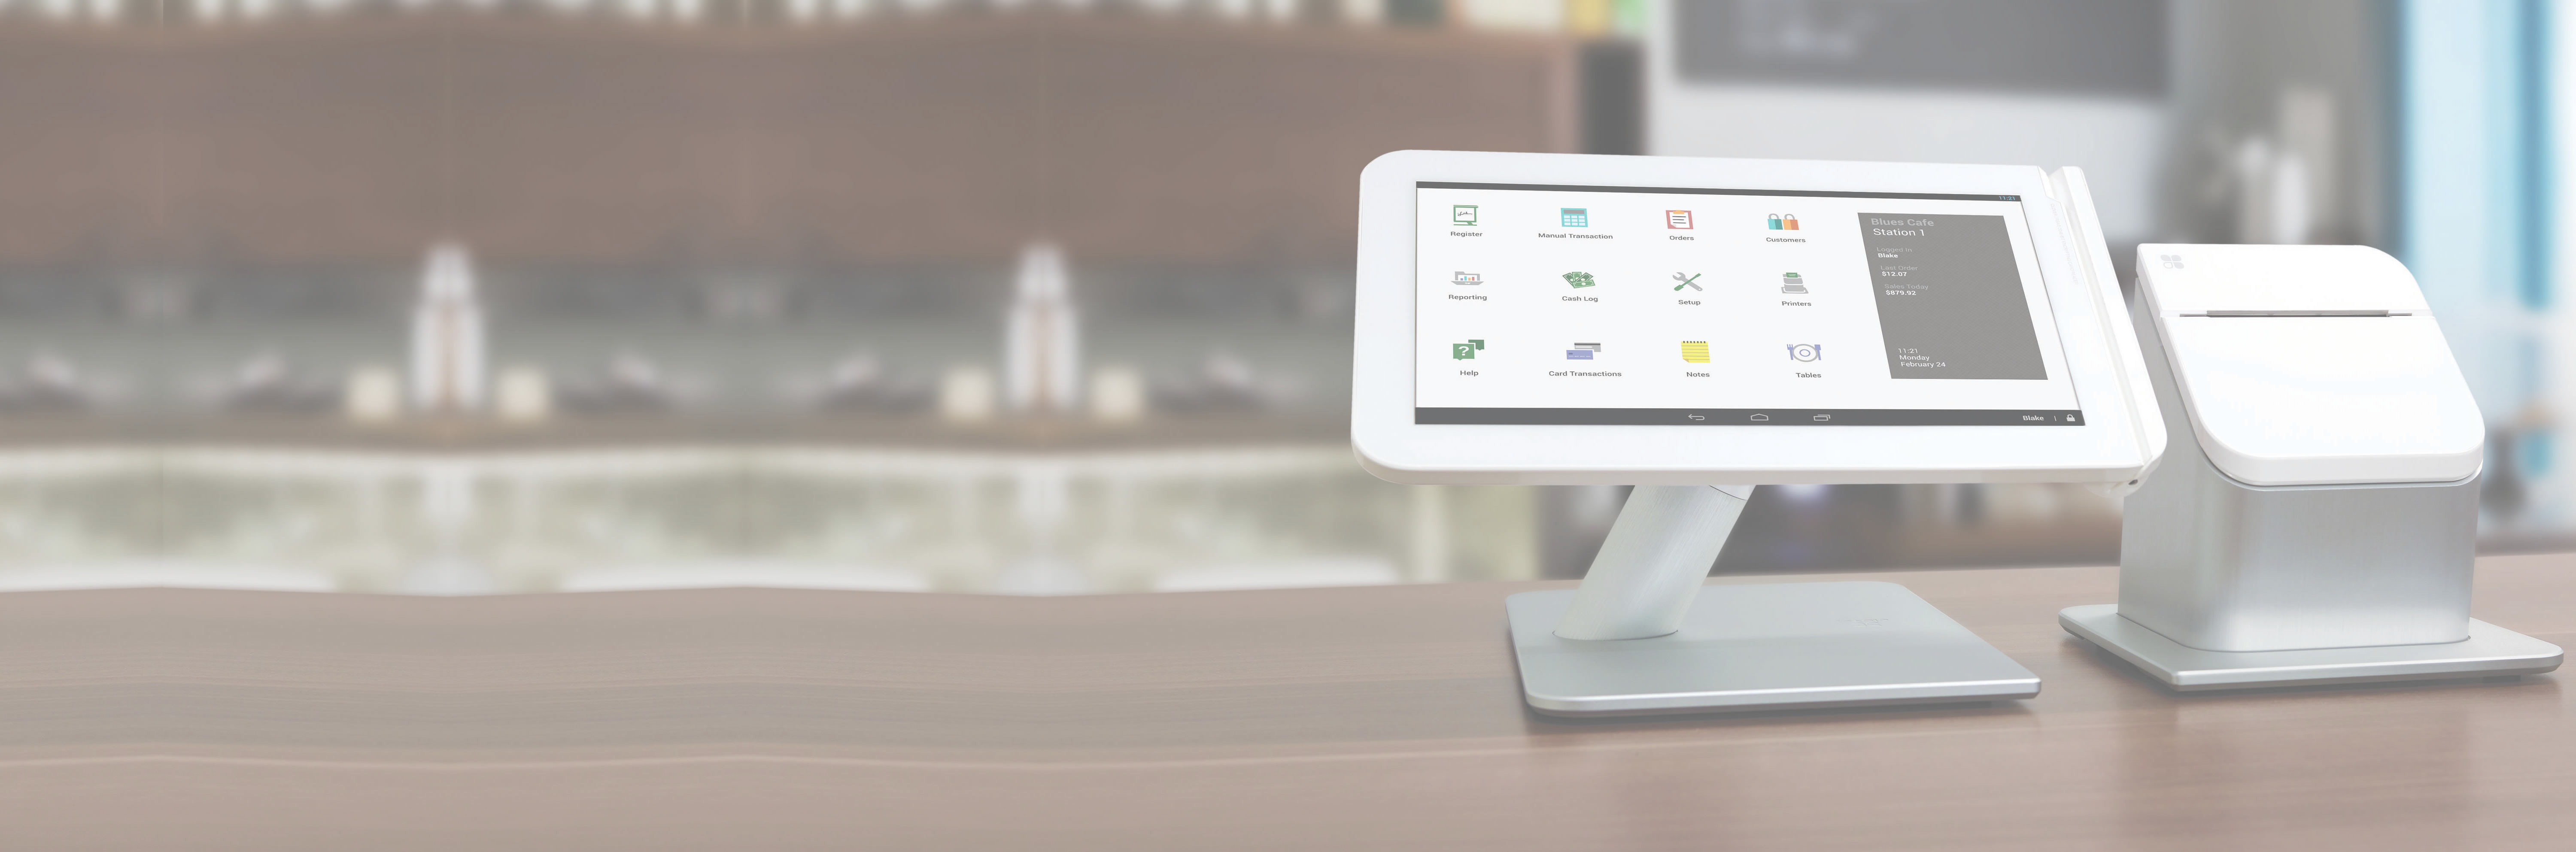 clover-pos-station-front-23